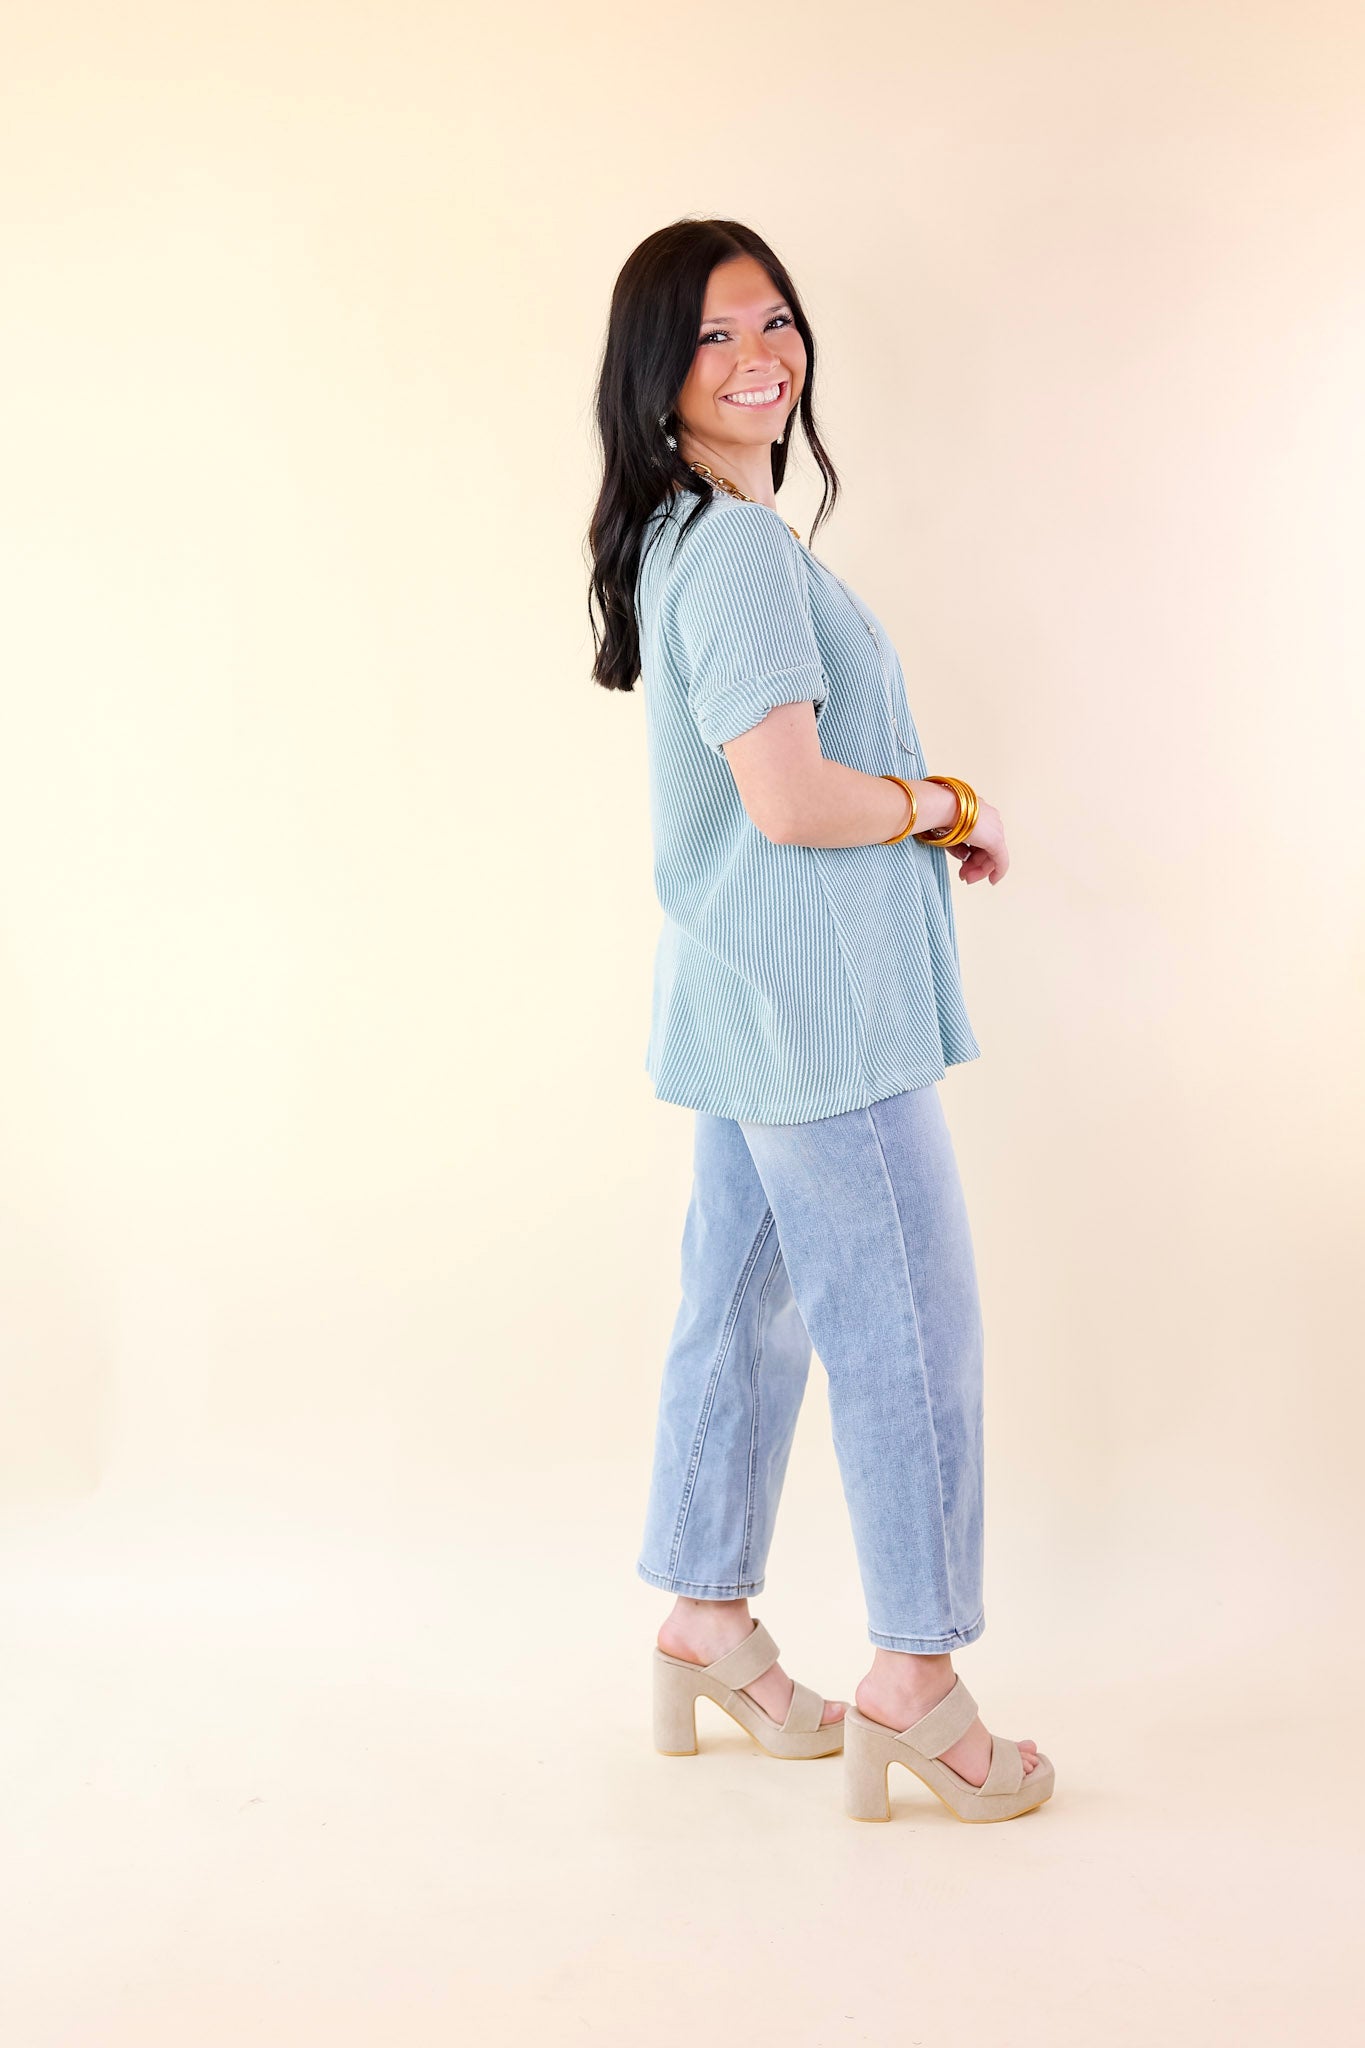 Only True Love Ribbed Short Sleeve Top with Front Pocket in Dusty Turquoise - Giddy Up Glamour Boutique